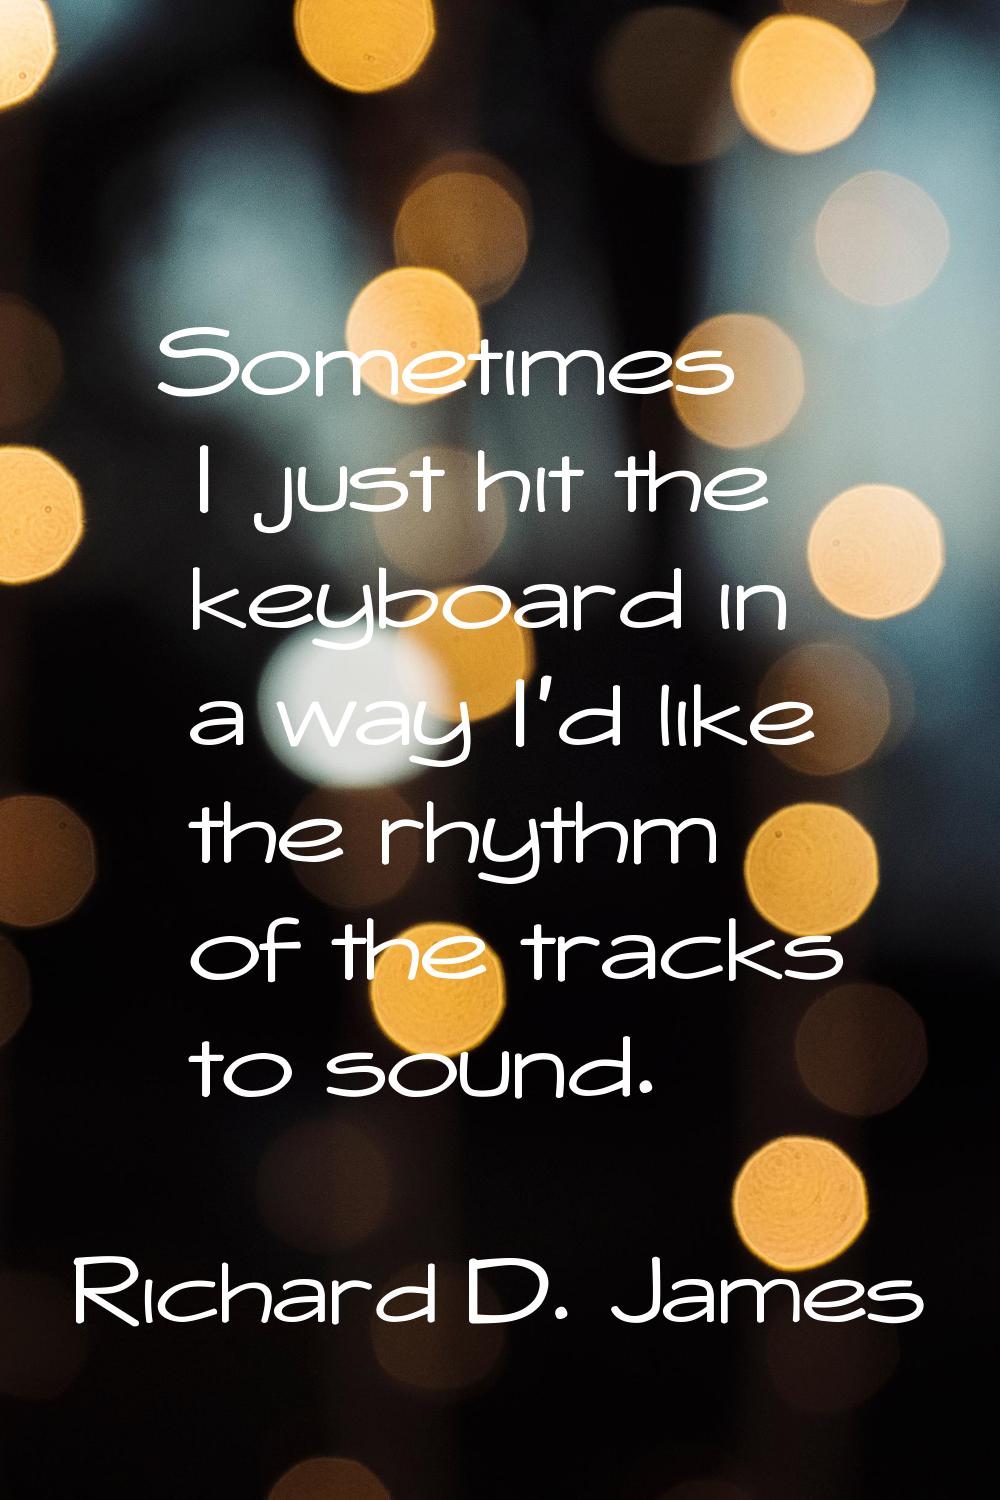 Sometimes I just hit the keyboard in a way I'd like the rhythm of the tracks to sound.